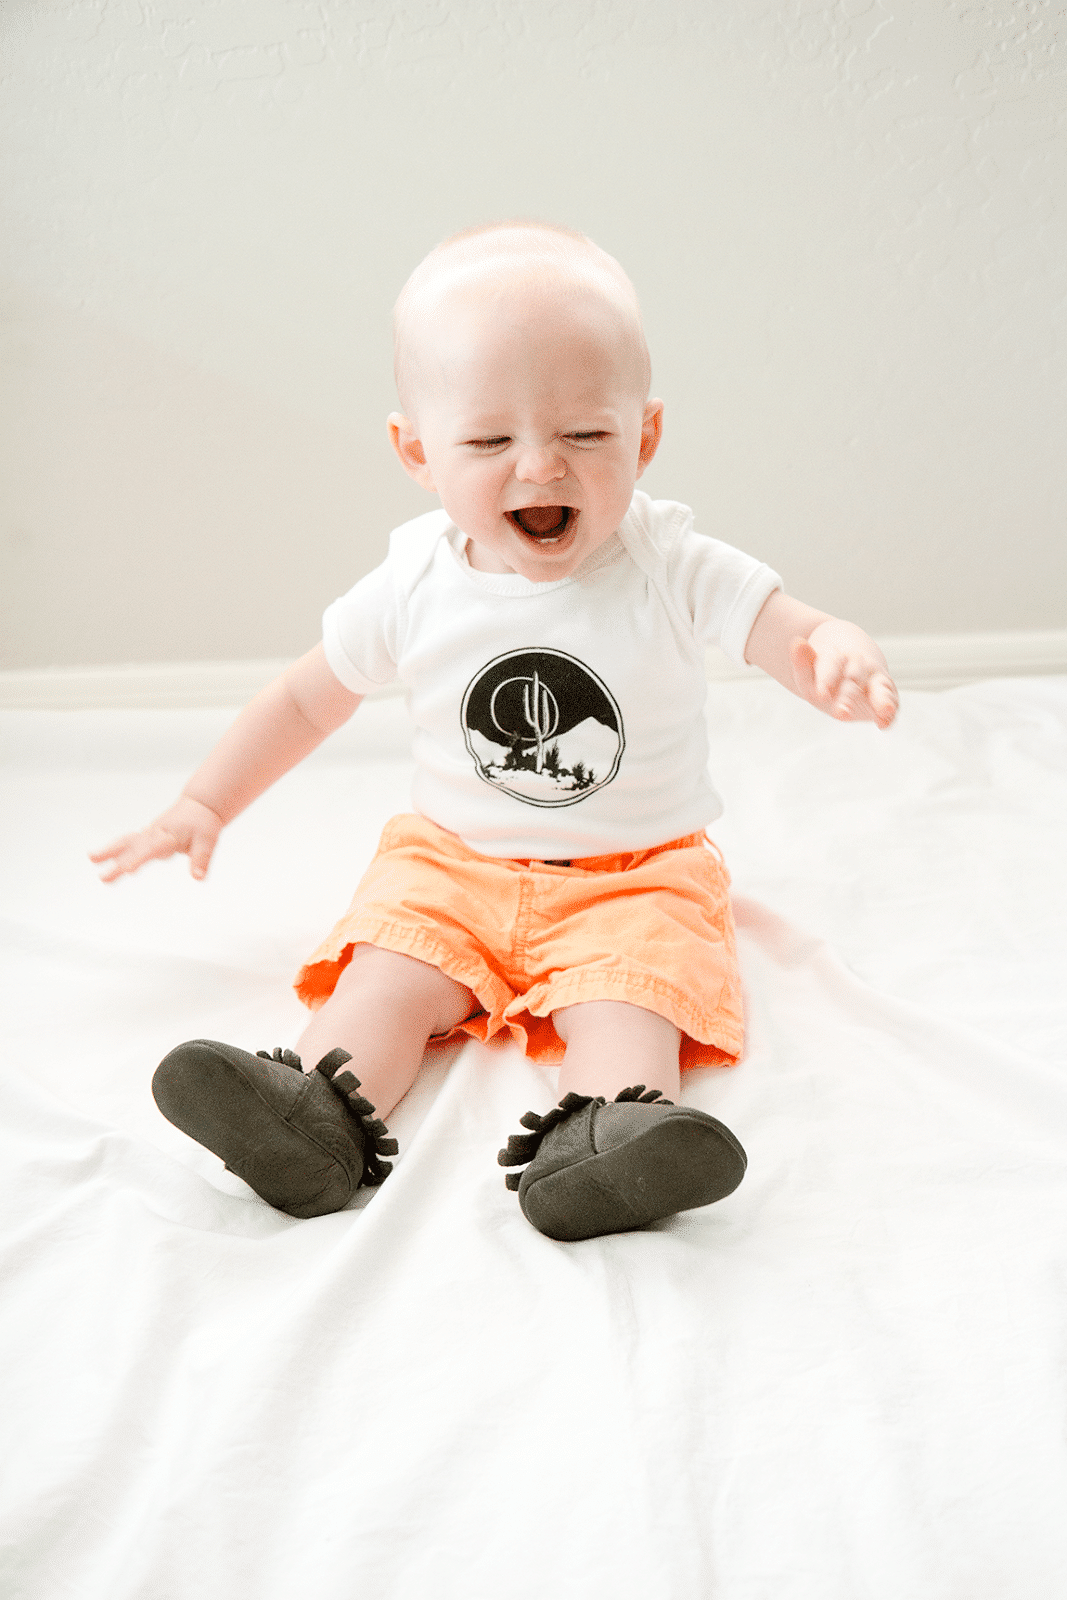 Where Did This Toddler Come From?- Plus a Giveaway!